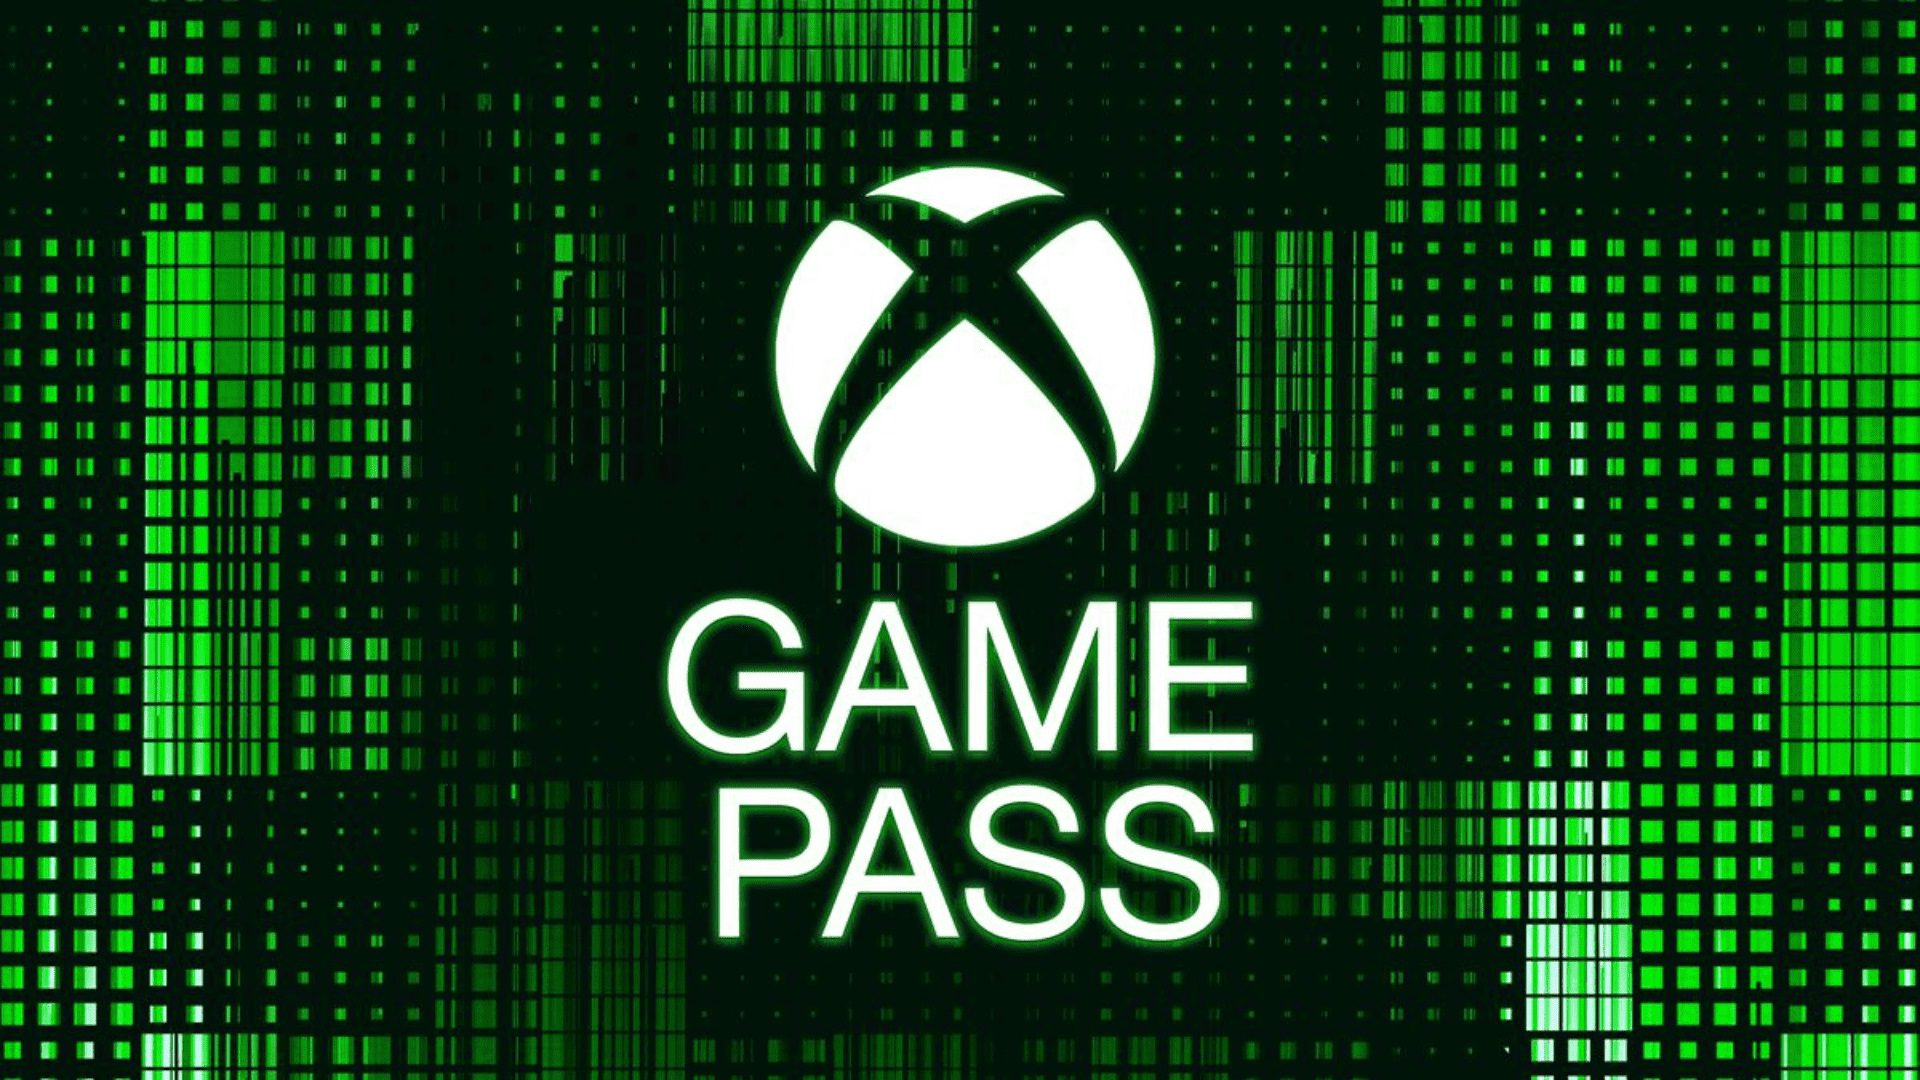 Today we have a new game for Xbox Game Pass